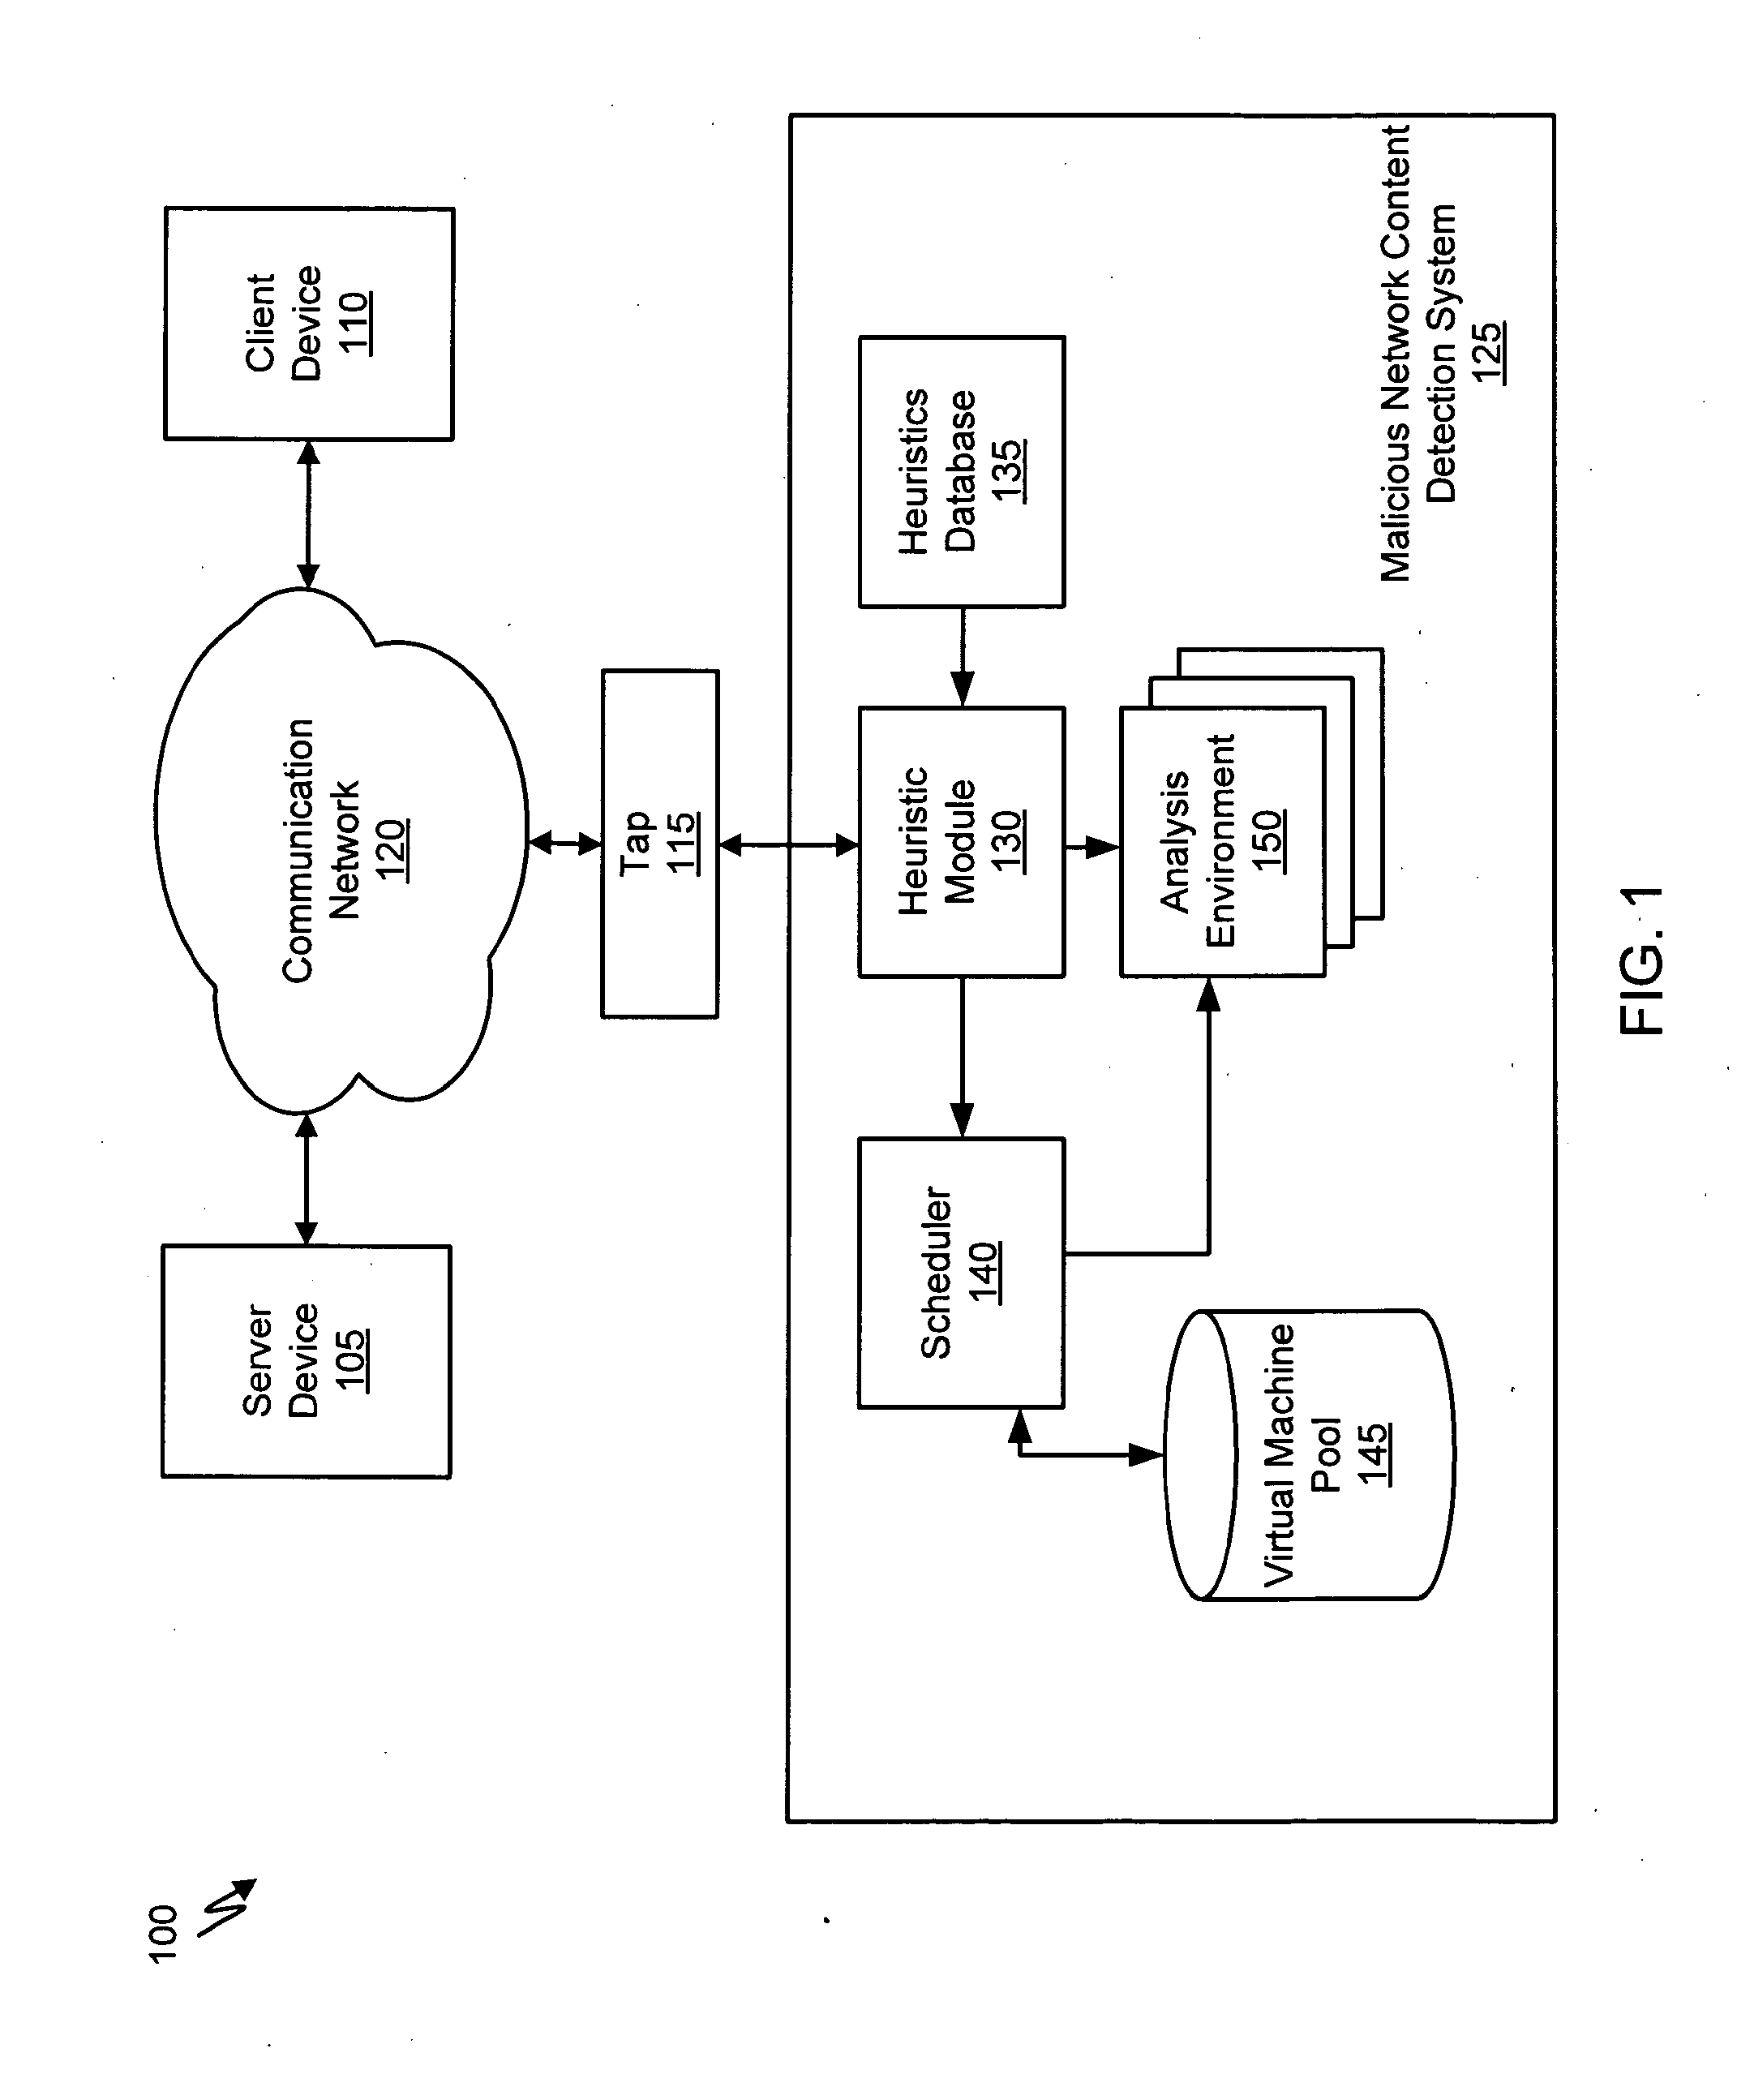 Systems and Methods for Scheduling Analysis of Network Content for Malware